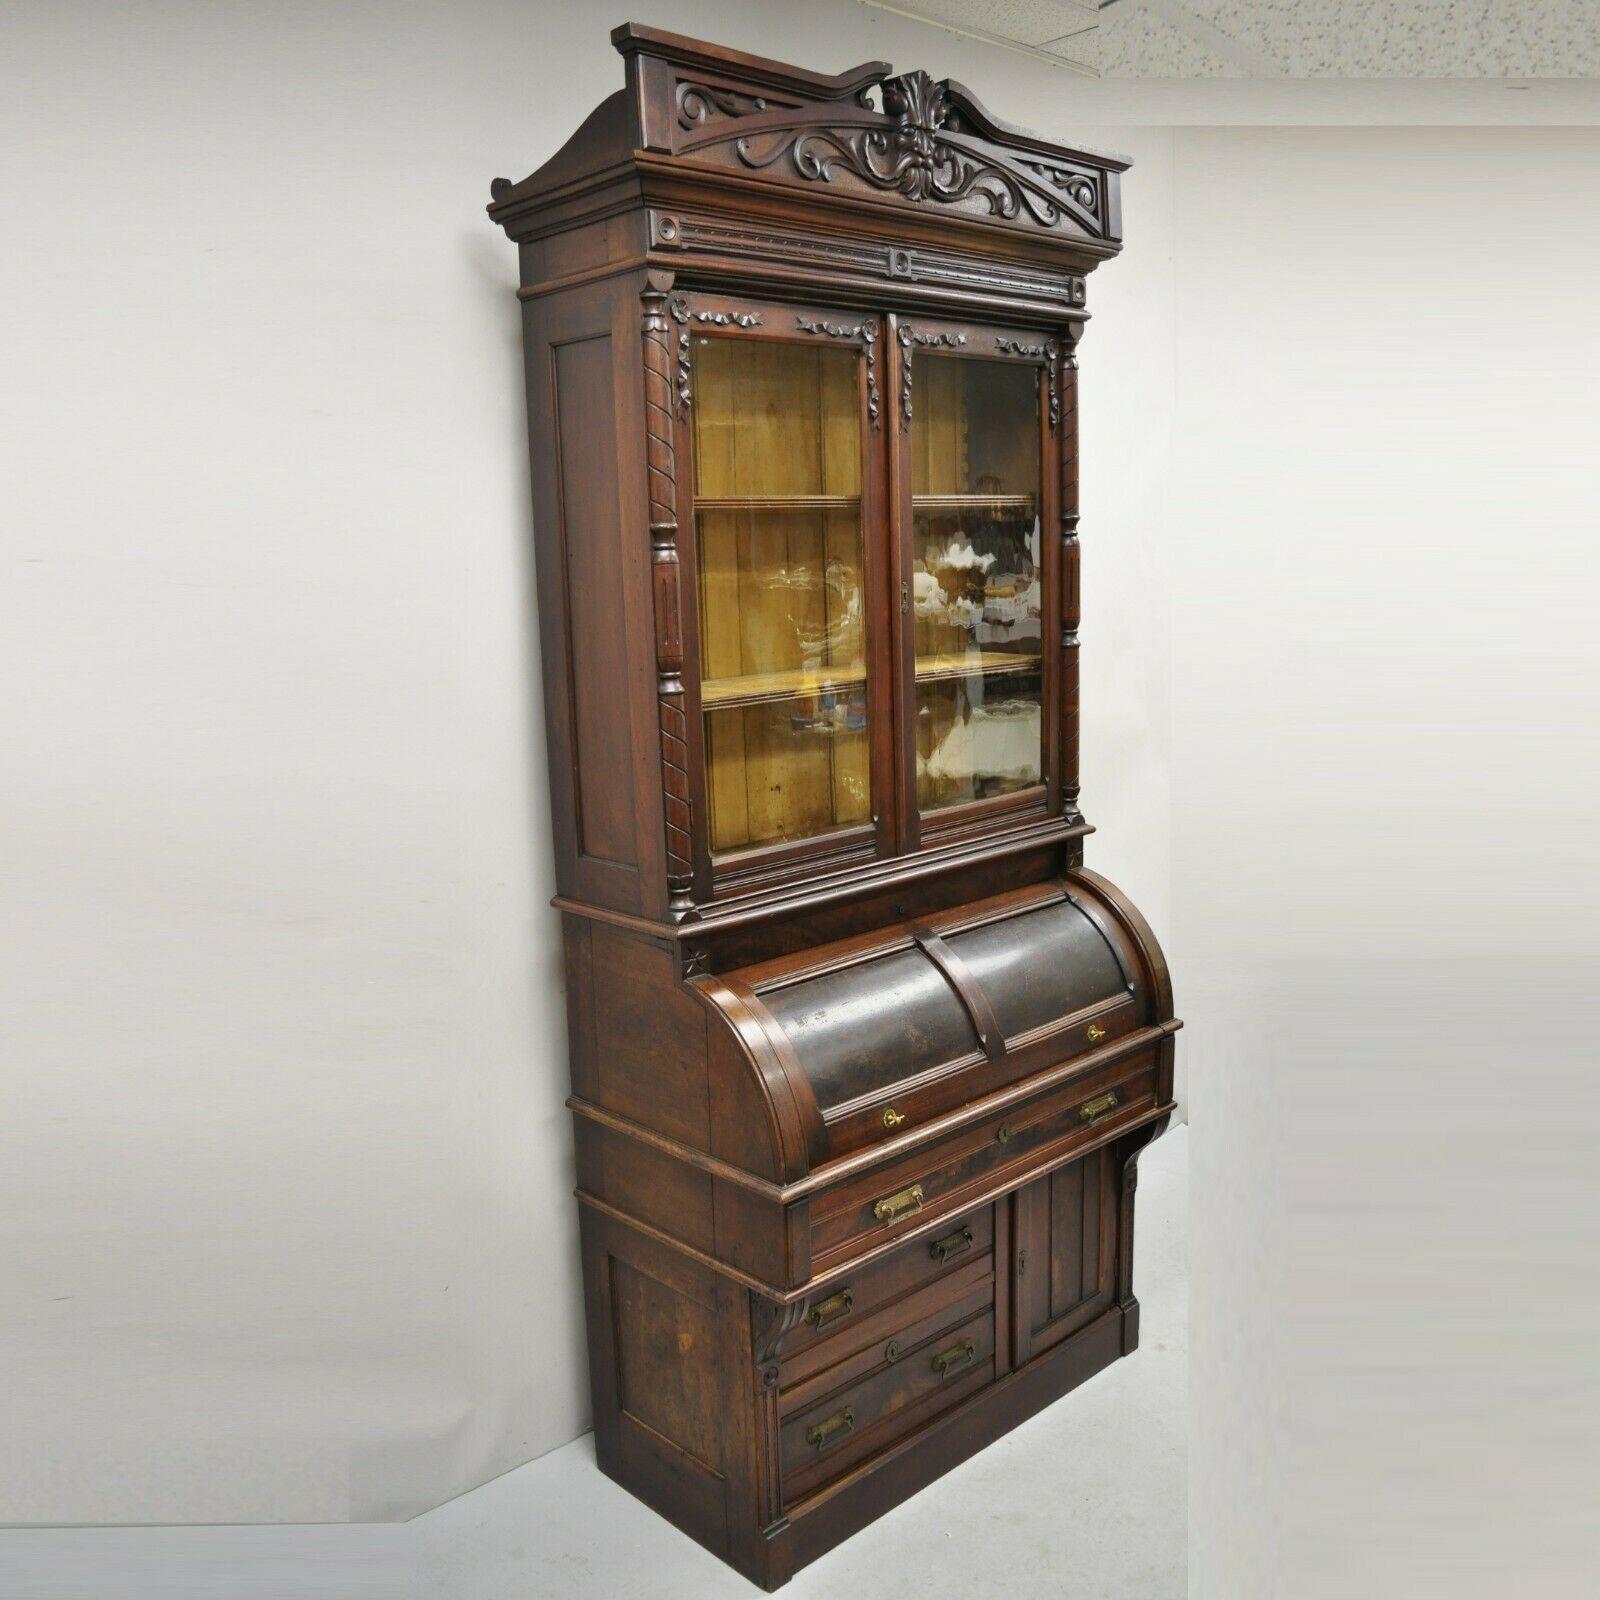 Antique Victorian Burl walnut cylinder roll secretary desk bookcase cabinet. Item features a carved north wind face pediment, original wavy glass, pull out writing surface, beautiful wood grain, nicely carved details, 3 part construction, working